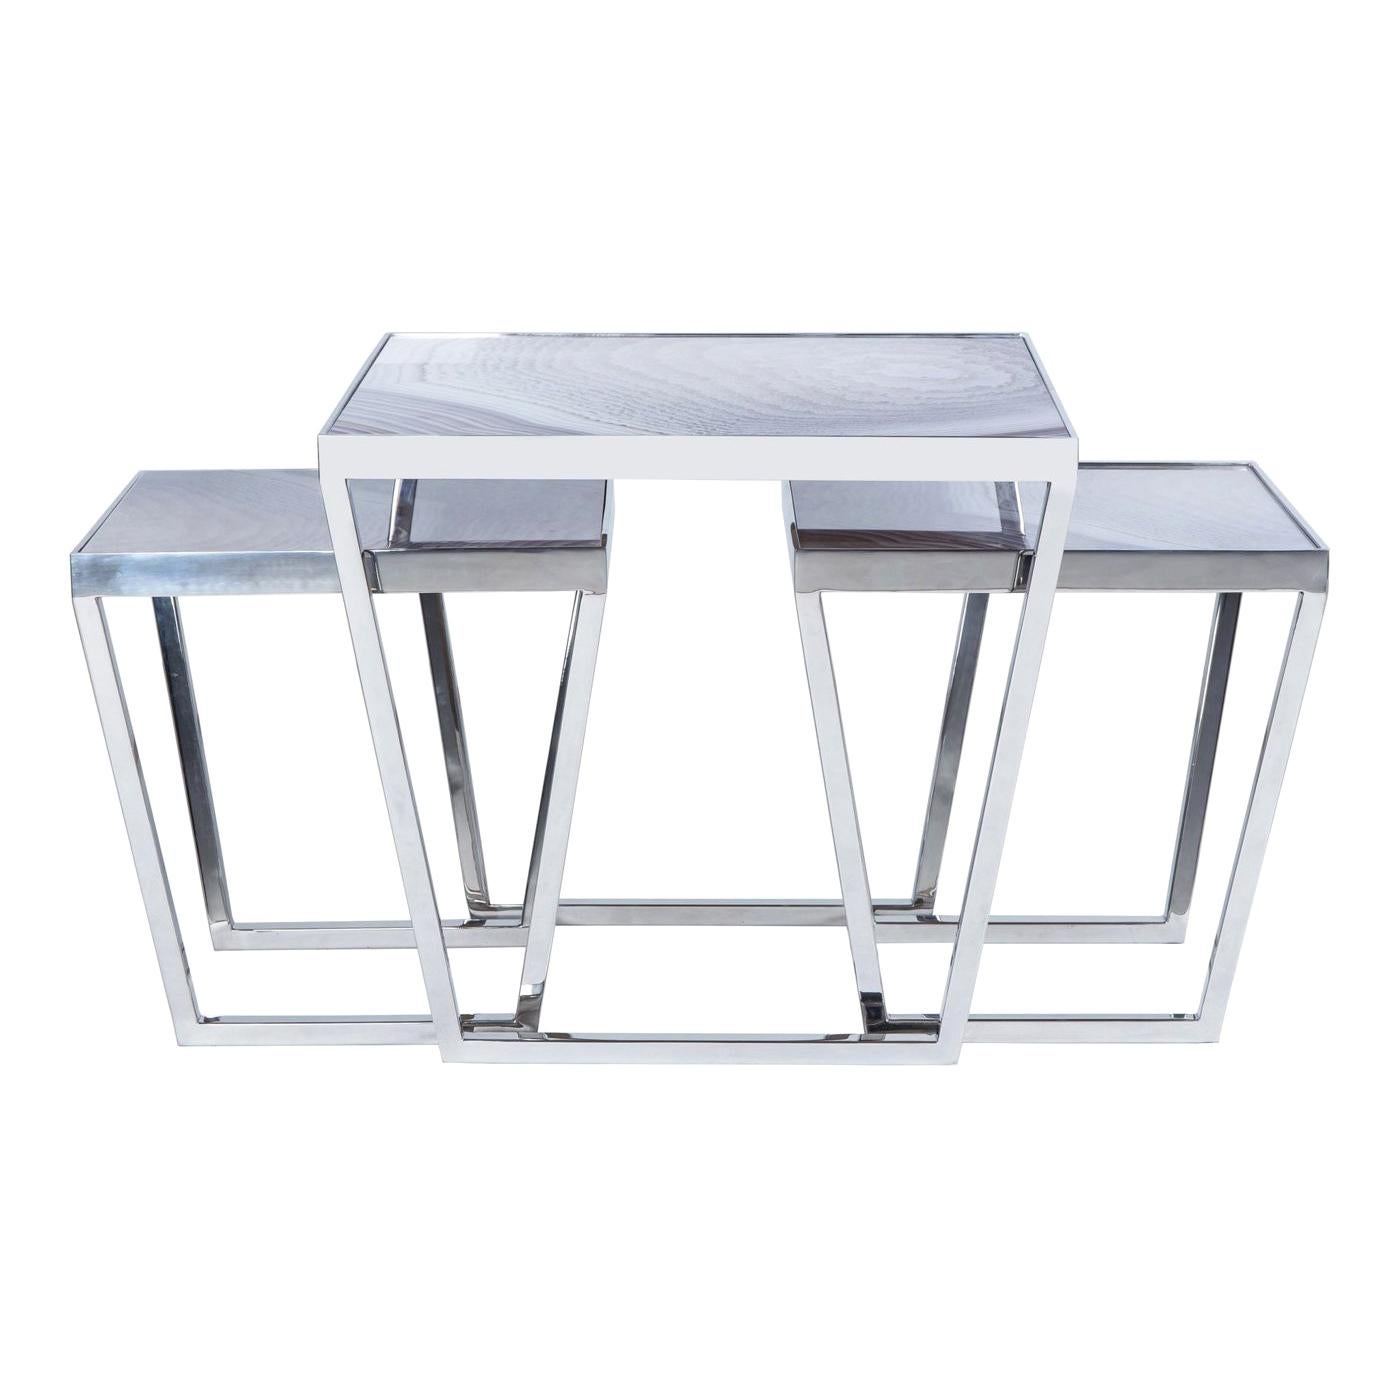 Printed Glass Set of 3 Coffee Tables